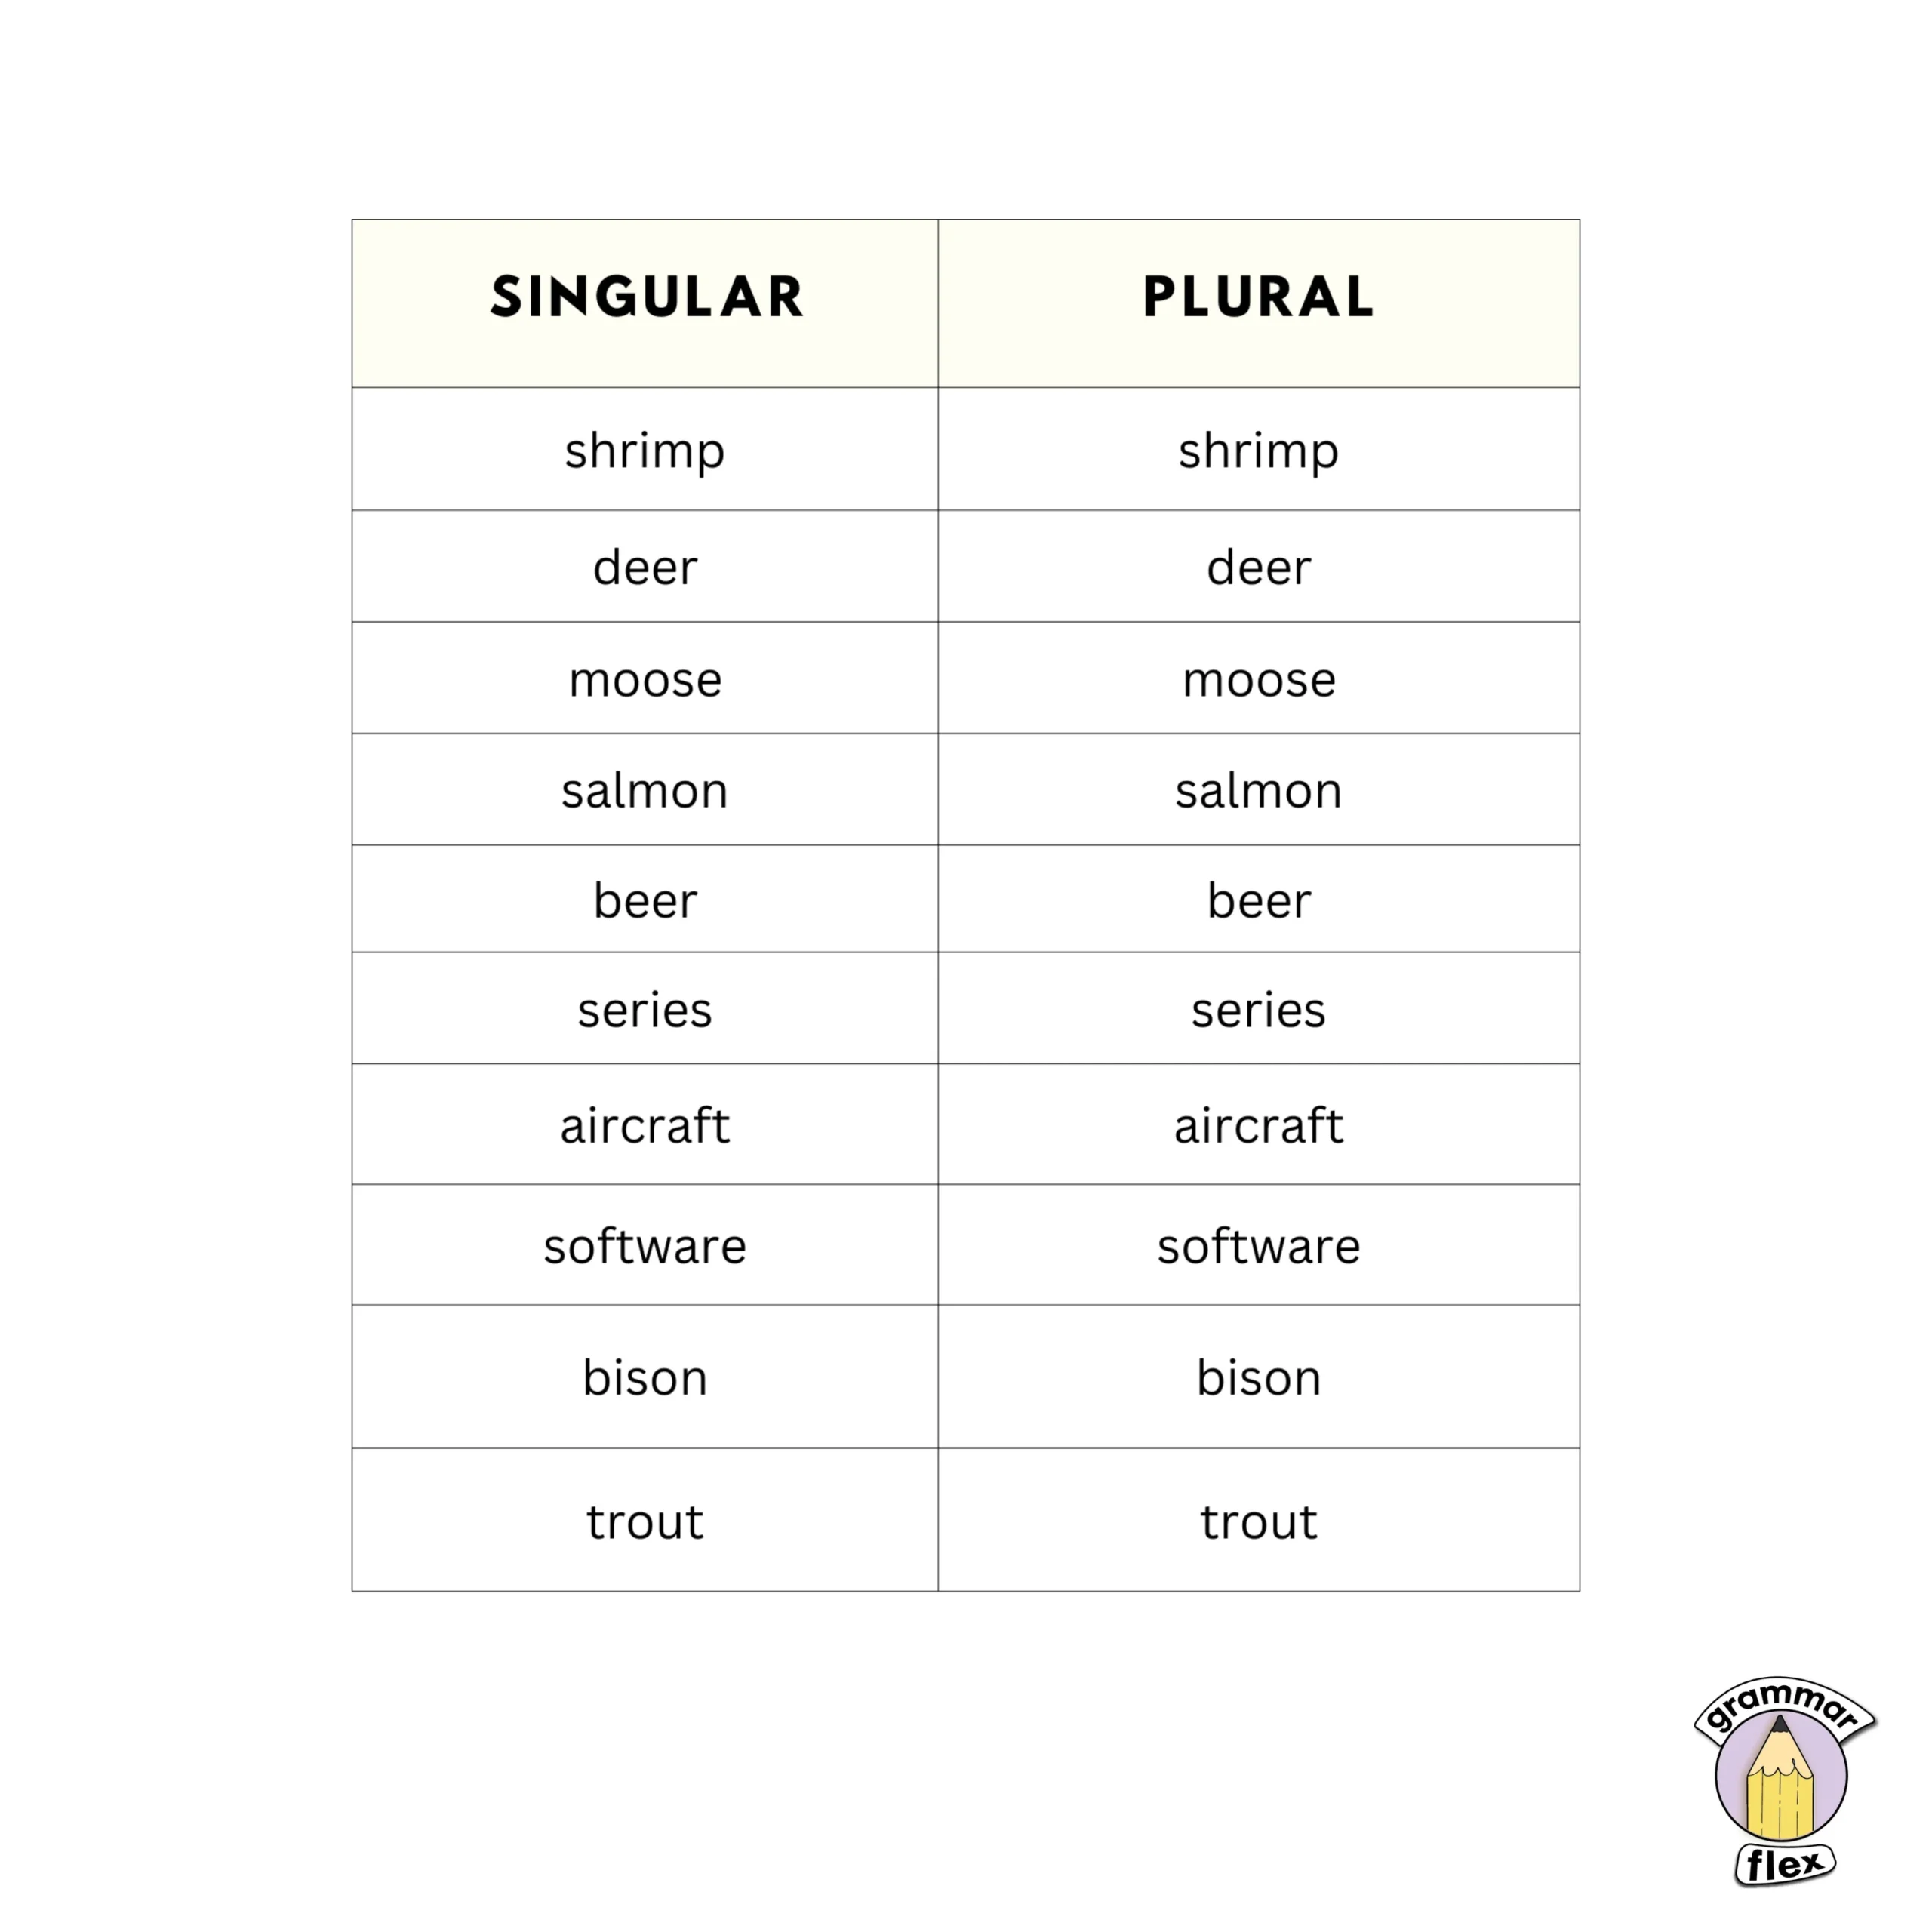 Irregular nouns with one form.